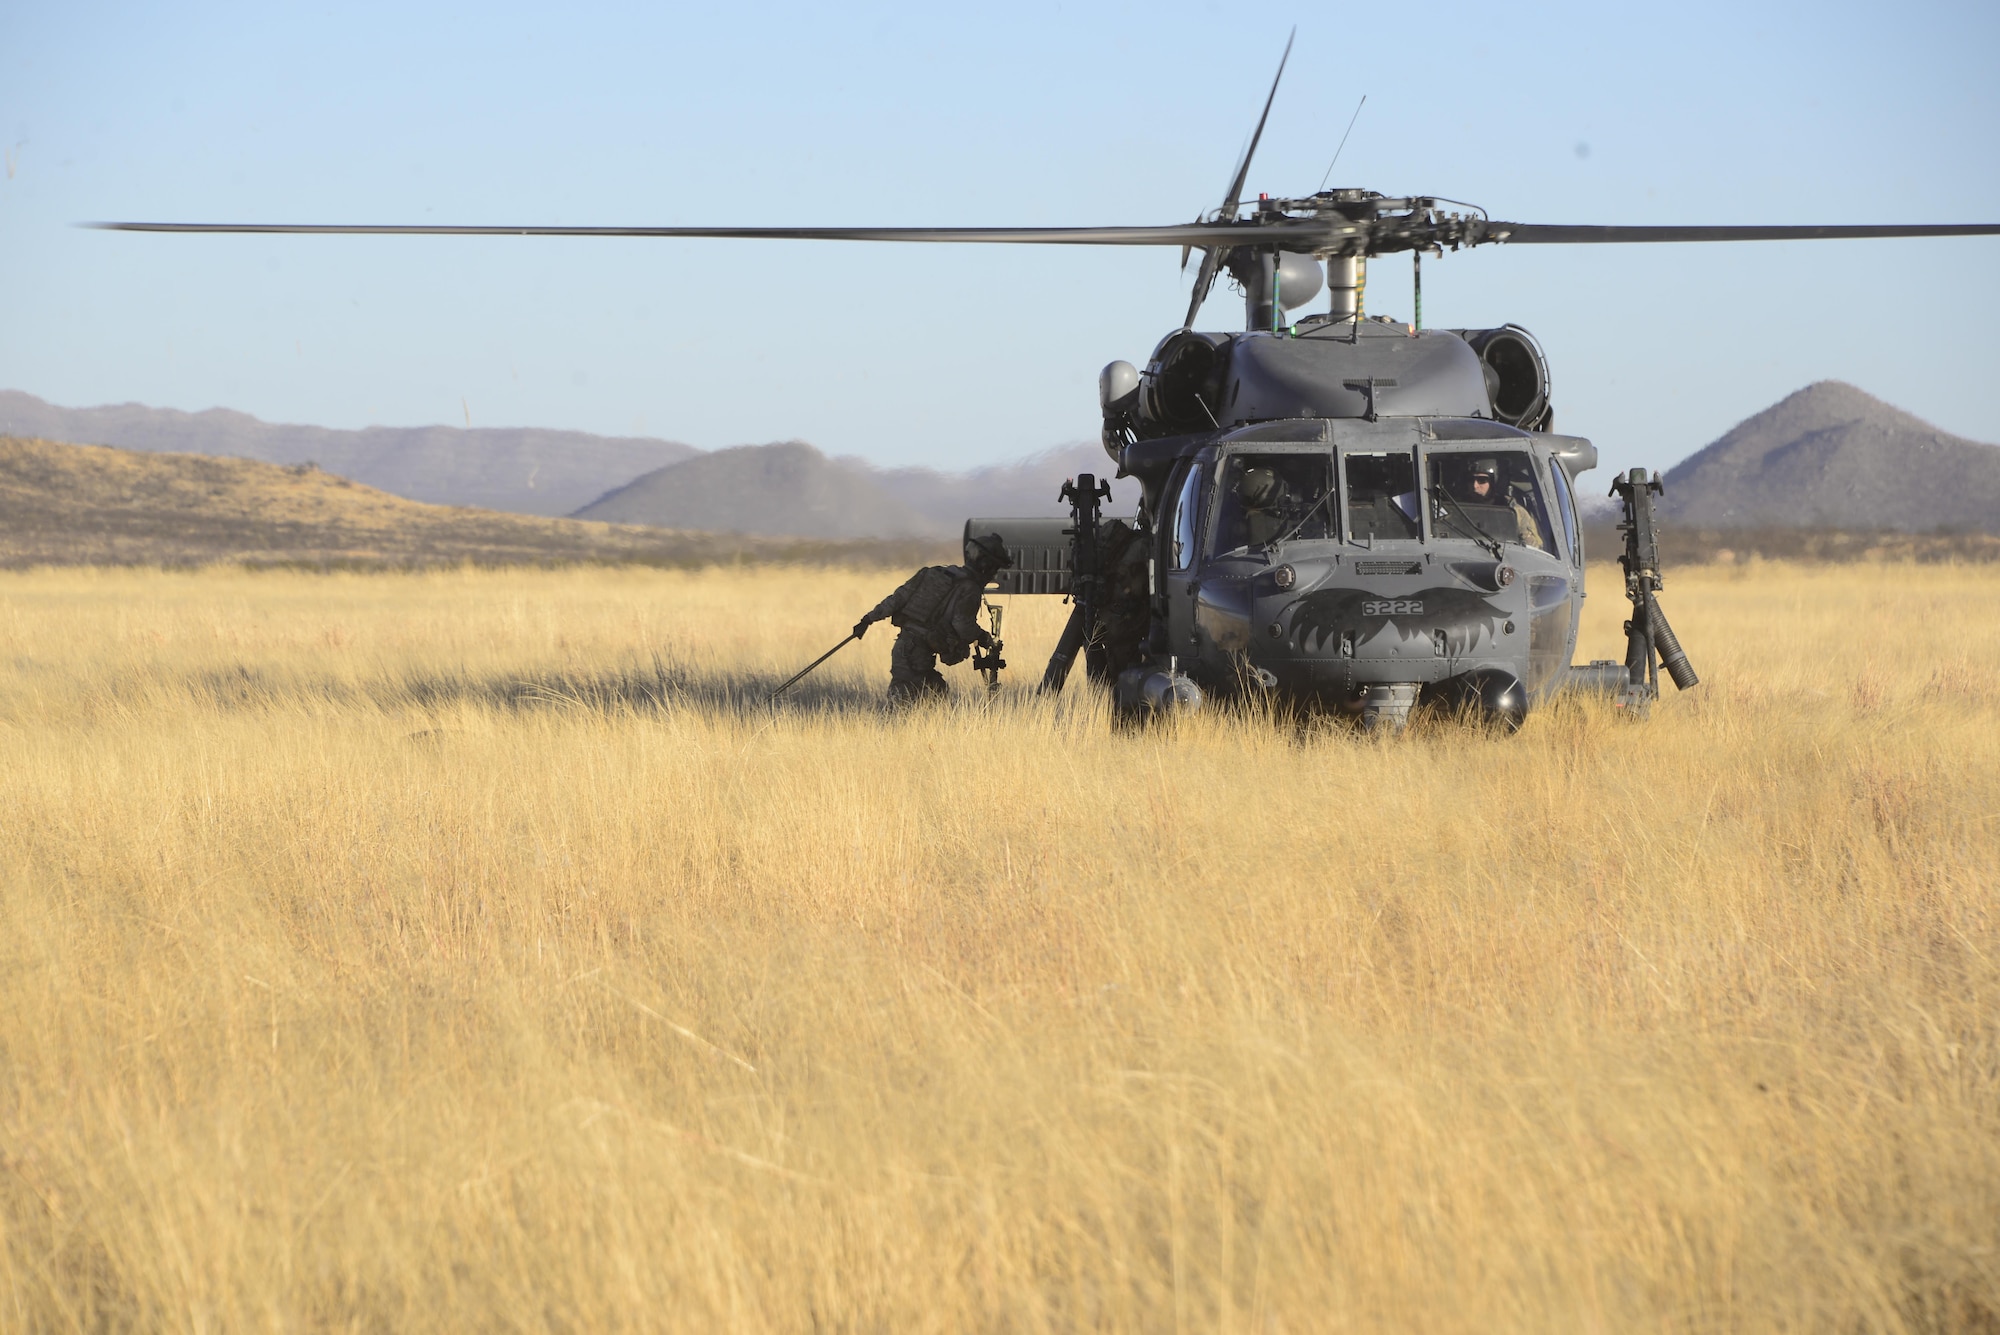 U.S. Air Force pararescuemen assigned to the 48th Rescue Squadron load simulated casualties onto an HH-60G Pave Hawk assigned to the 55th Rescue Squadron during a mass casualty exercise at Fort Huachuca, Ariz., Dec. 8, 2016. Pararescuemen were air dropped into the site of a simulated plane crash, where they triaged casualties and had them airlifted from the site. (U.S. Air Force photo by Senior Airman Betty R. Chevalier)